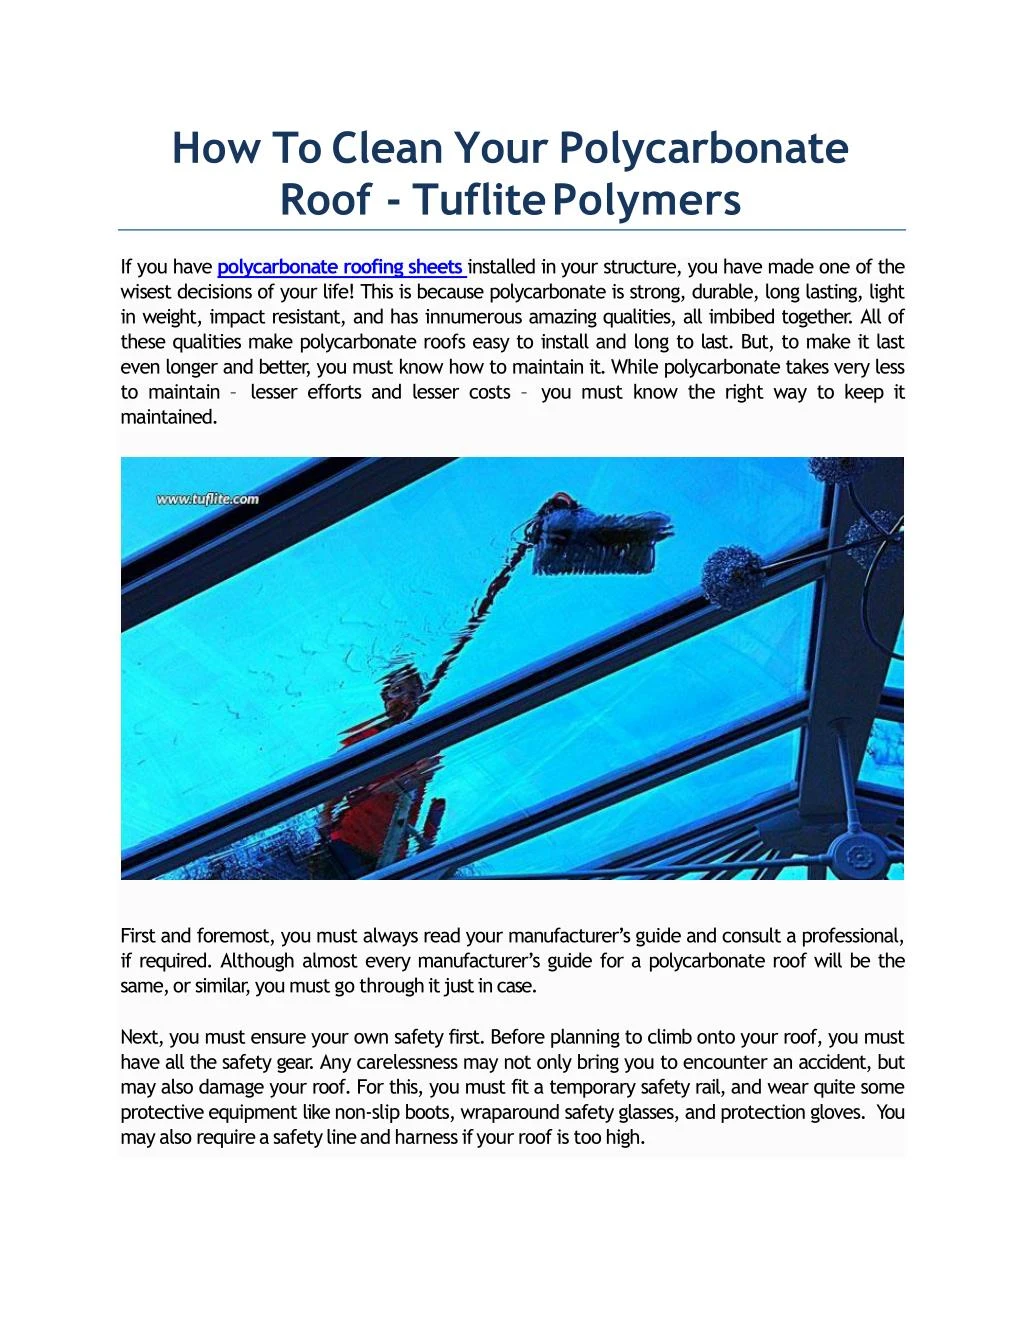 how to clean your polycarbonate roof tuflite polymers